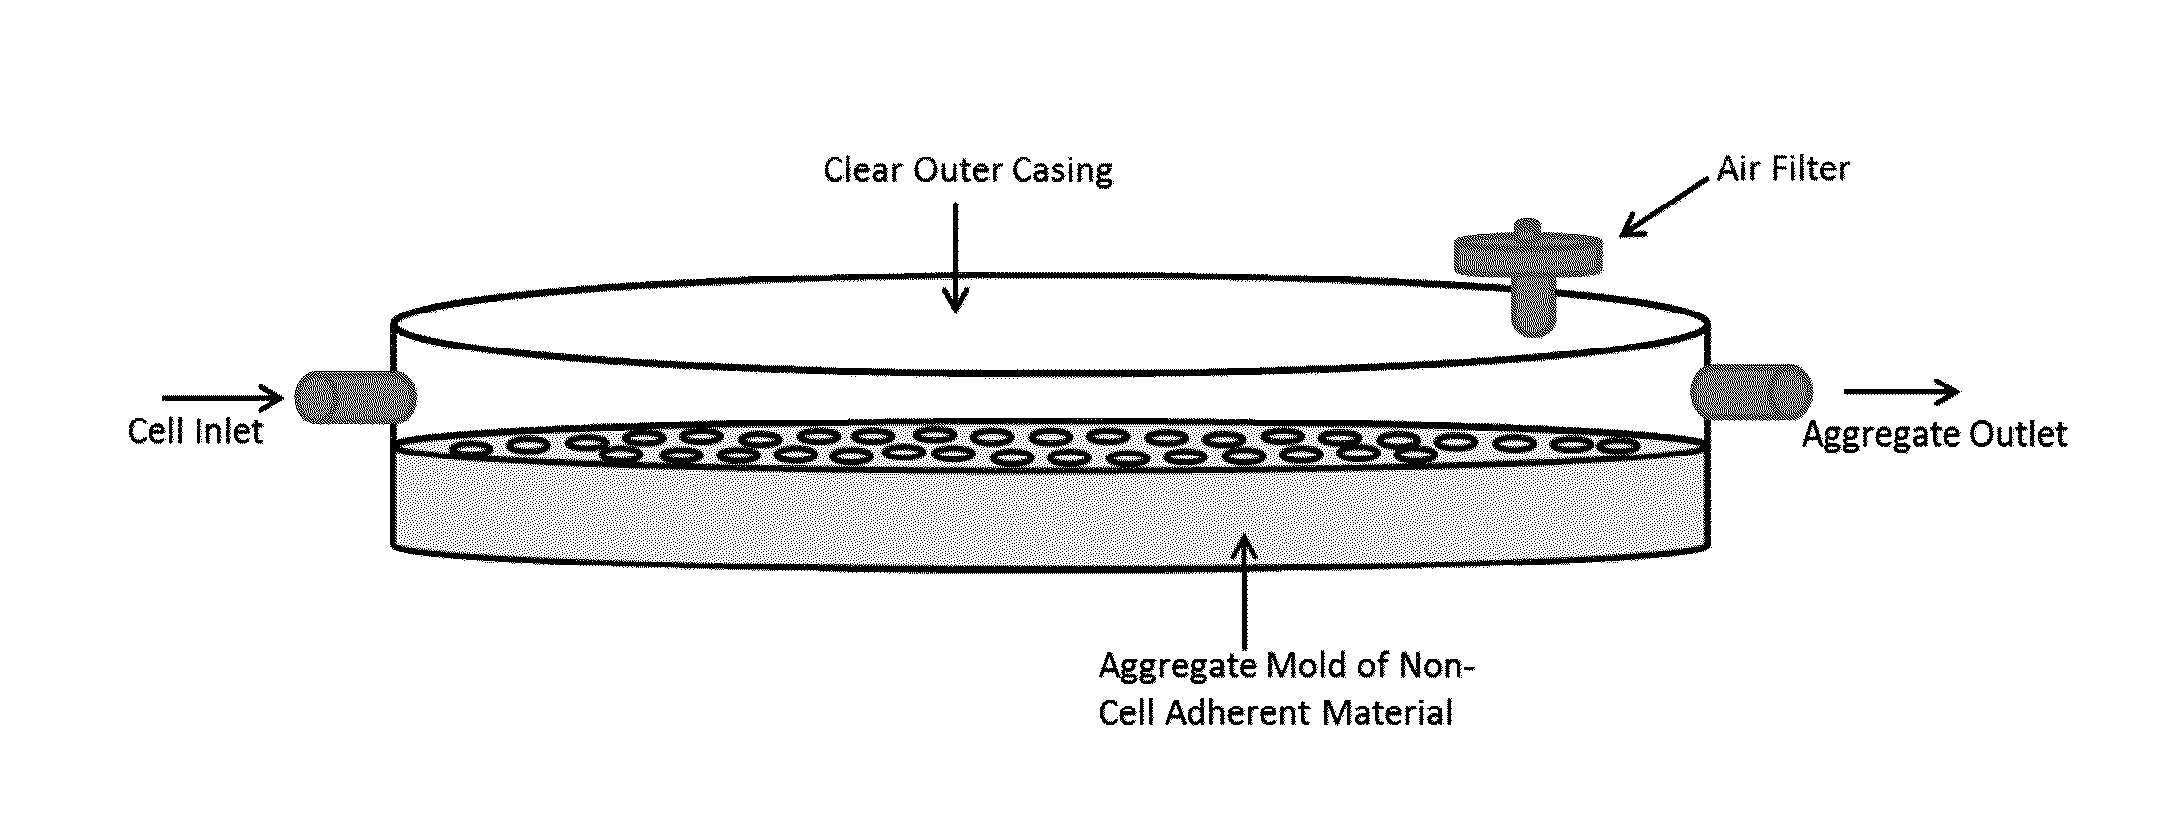 Formation of cell aggregates